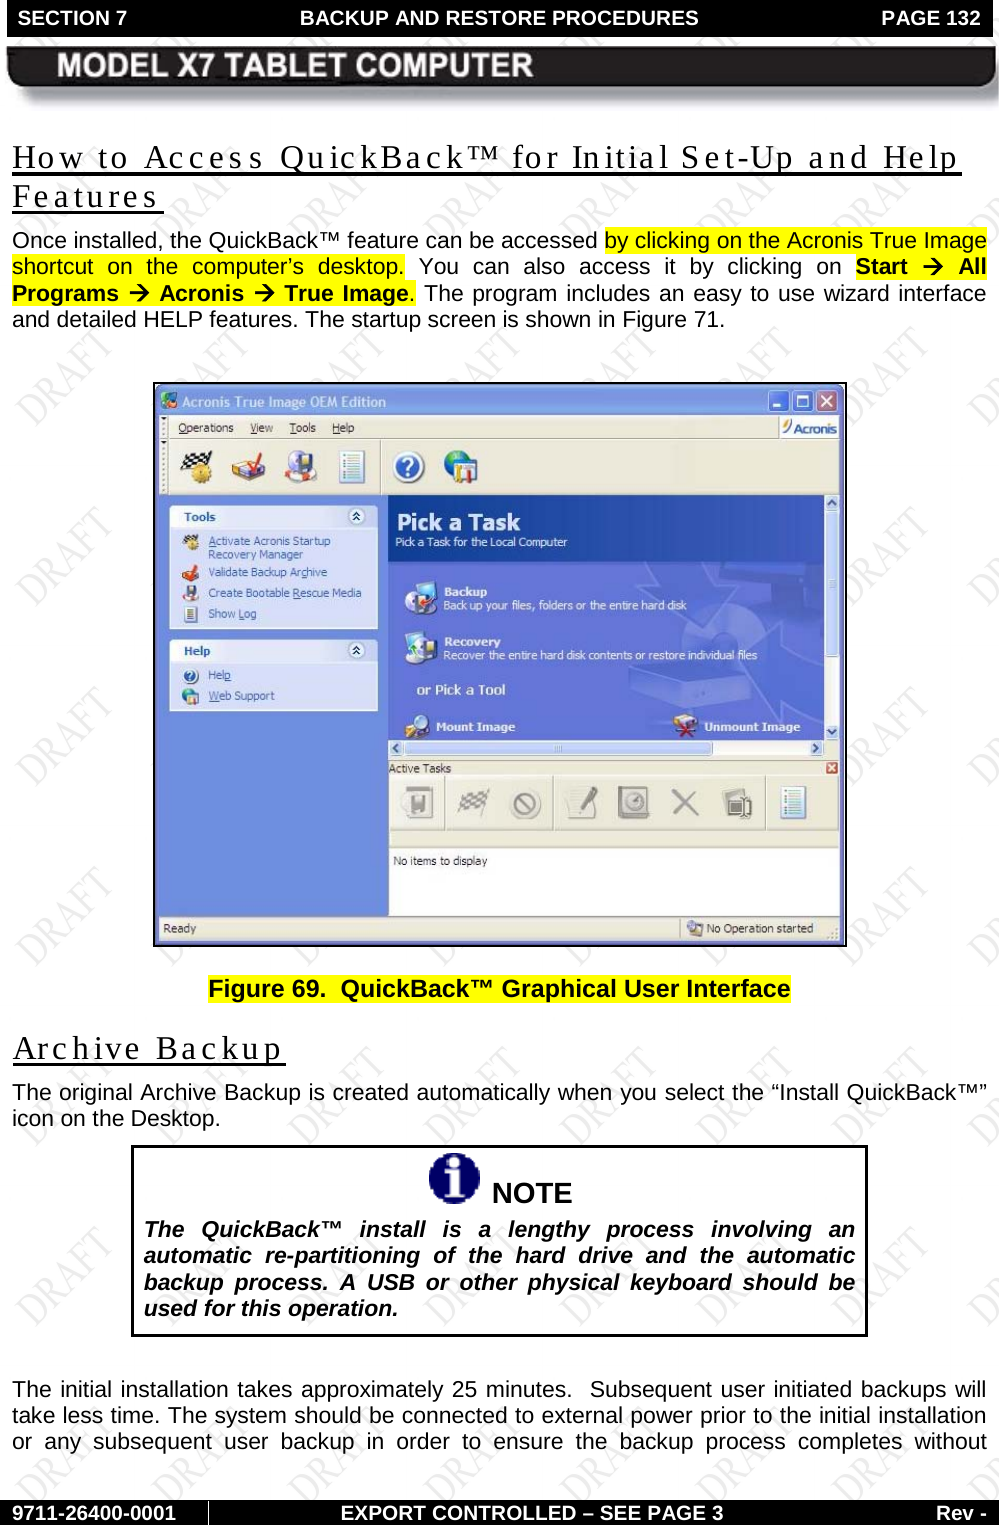 SECTION 7  BACKUP AND RESTORE PROCEDURES  PAGE 132        9711-26400-0001 EXPORT CONTROLLED – SEE PAGE 3 Rev - How to Access QuickBack™ for Initial Set-Up and Help Features Once installed, the QuickBack™ feature can be accessed by clicking on the Acronis True Image shortcut on the computer’s desktop. You can also access it by clicking on Start à All Programs à Acronis à True Image. The program includes an easy to use wizard interface and detailed HELP features. The startup screen is shown in Figure 71.   Figure 69.  QuickBack™ Graphical User Interface Archive Backup The original Archive Backup is created automatically when you select the “Install QuickBack™” icon on the Desktop.    NOTE The QuickBack™ install is a lengthy process involving an automatic re-partitioning of the hard drive and the automatic backup process. A USB or other physical keyboard should be used for this operation.  The initial installation takes approximately 25 minutes.  Subsequent user initiated backups will take less time. The system should be connected to external power prior to the initial installation or any subsequent user backup in order to ensure the backup process completes without  